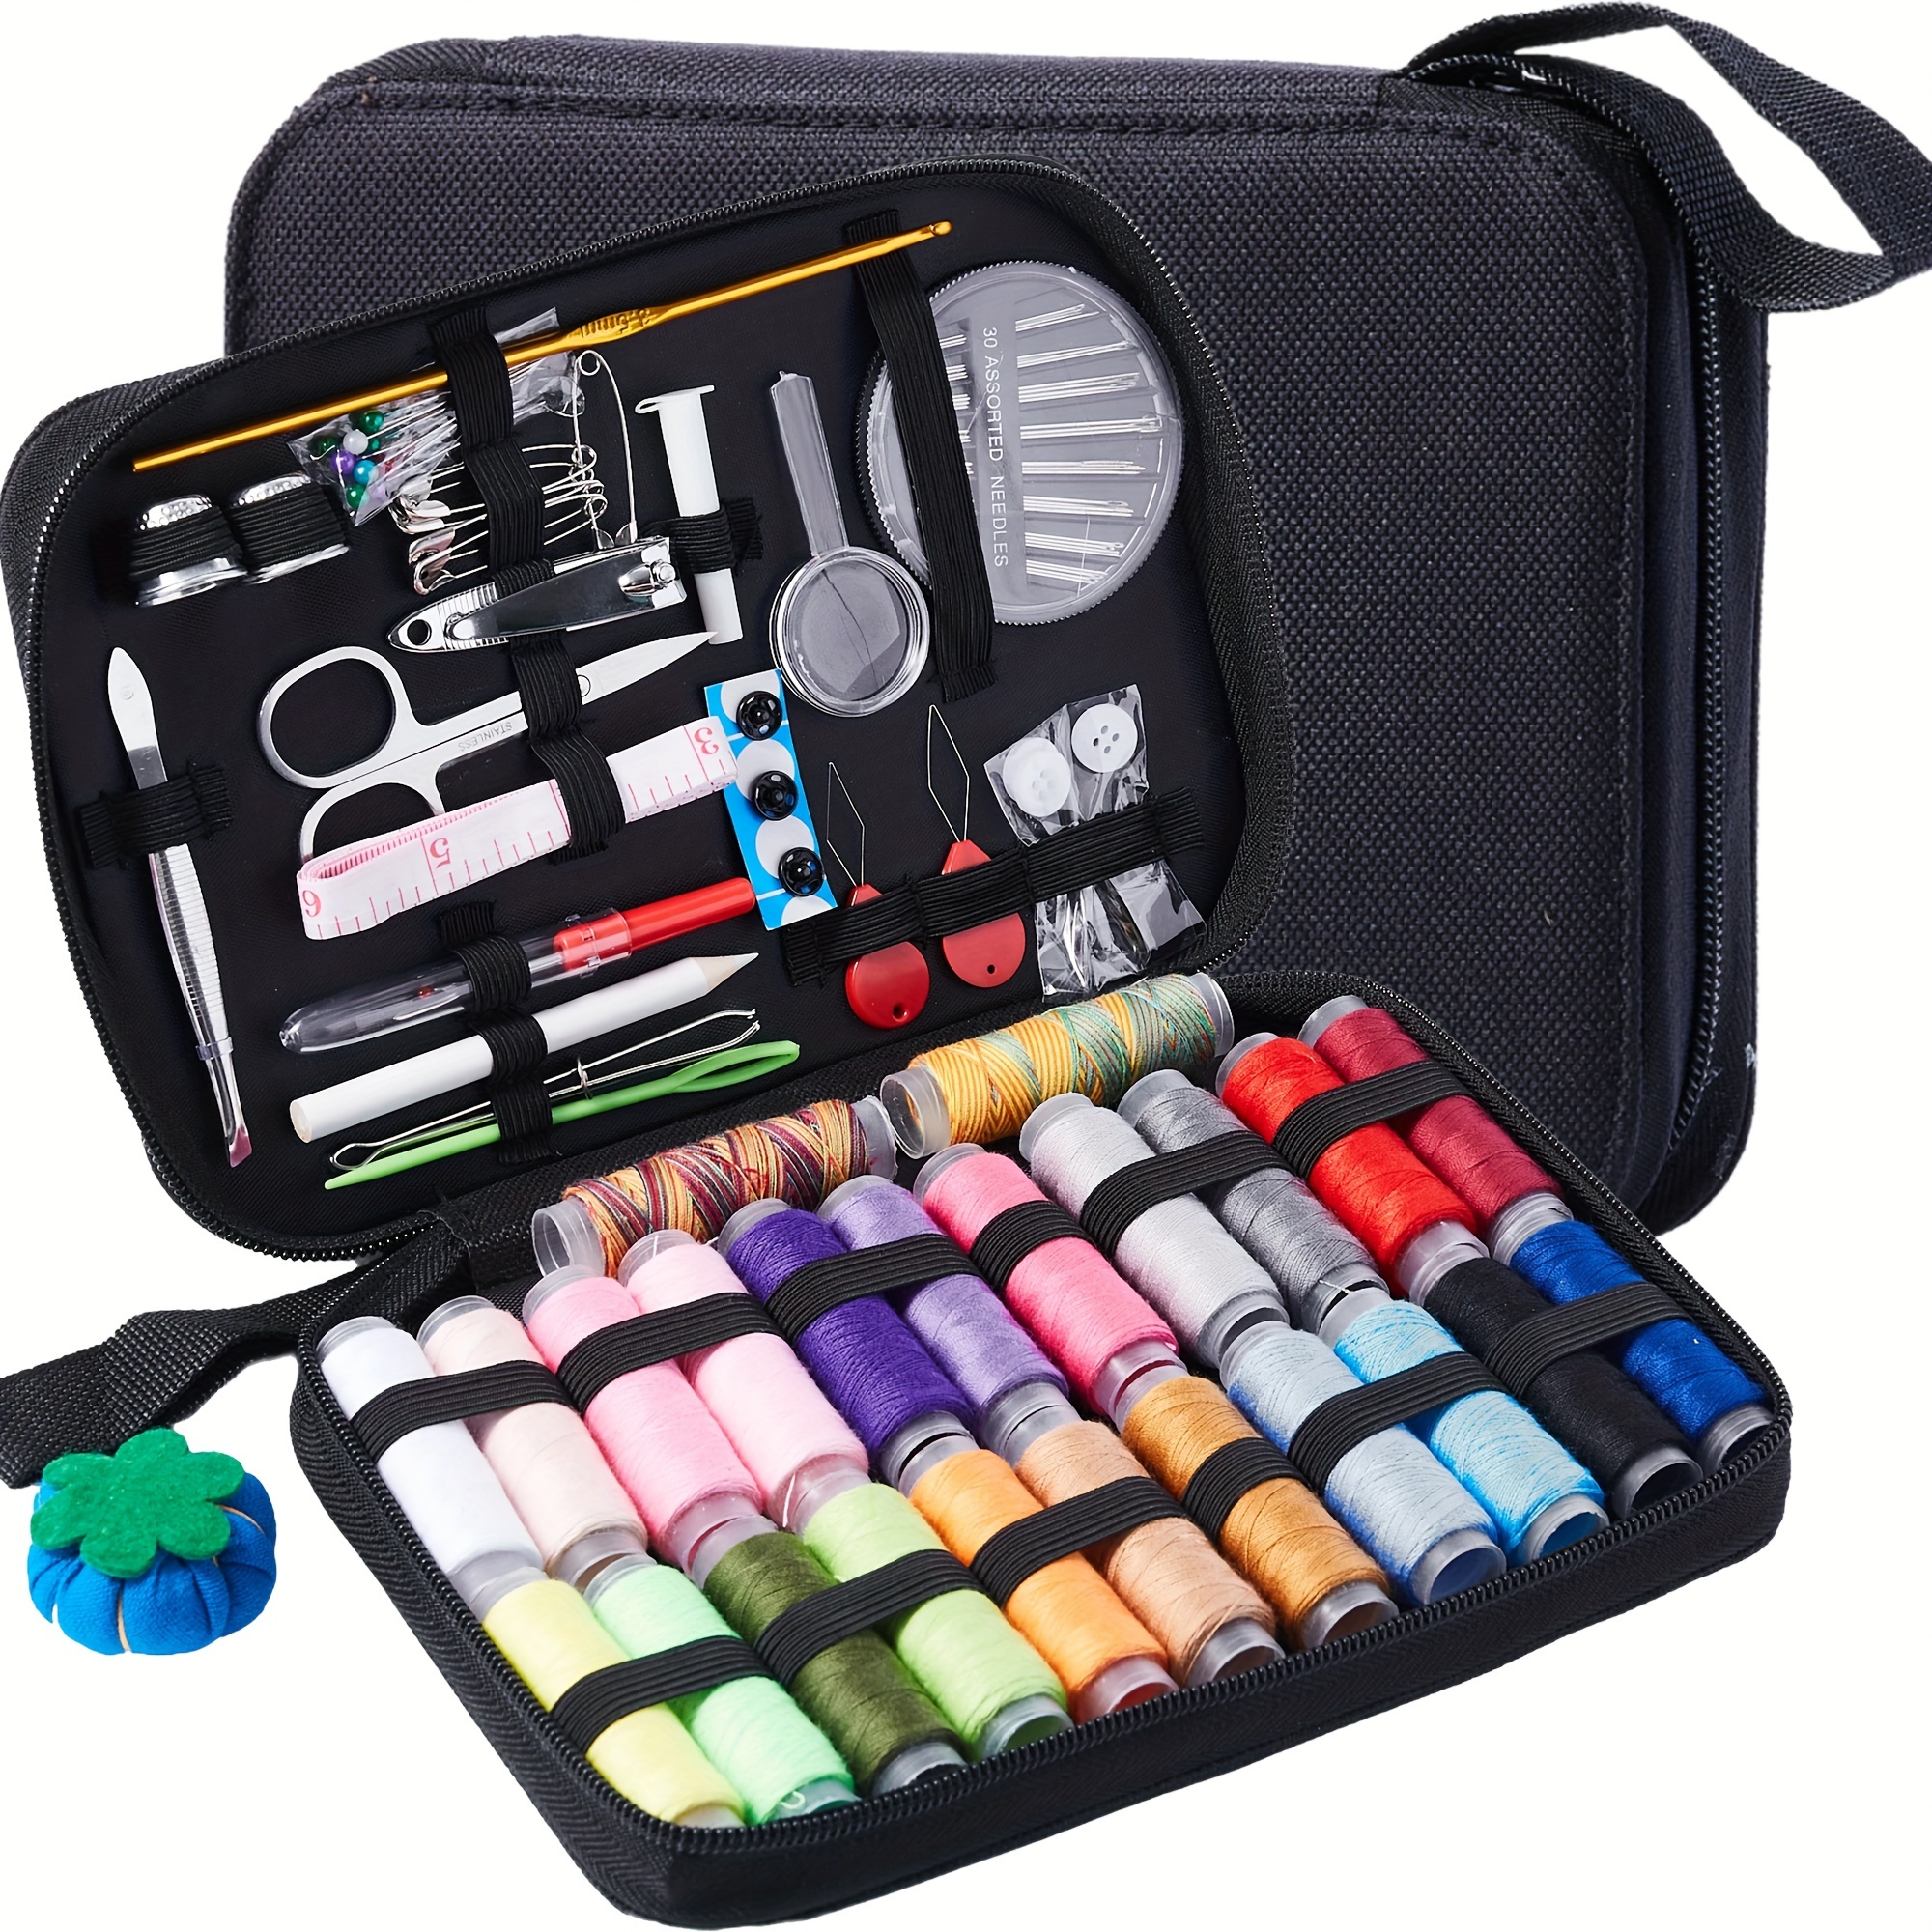 

74/98 Pcs Basic Sewing Set, Sewing Kit With Sewing Supplies And Accessories For Adults, Beginners, Home, Travel, Emergency, Including Scissors, Tape Measure, Needle Threader, Etc.